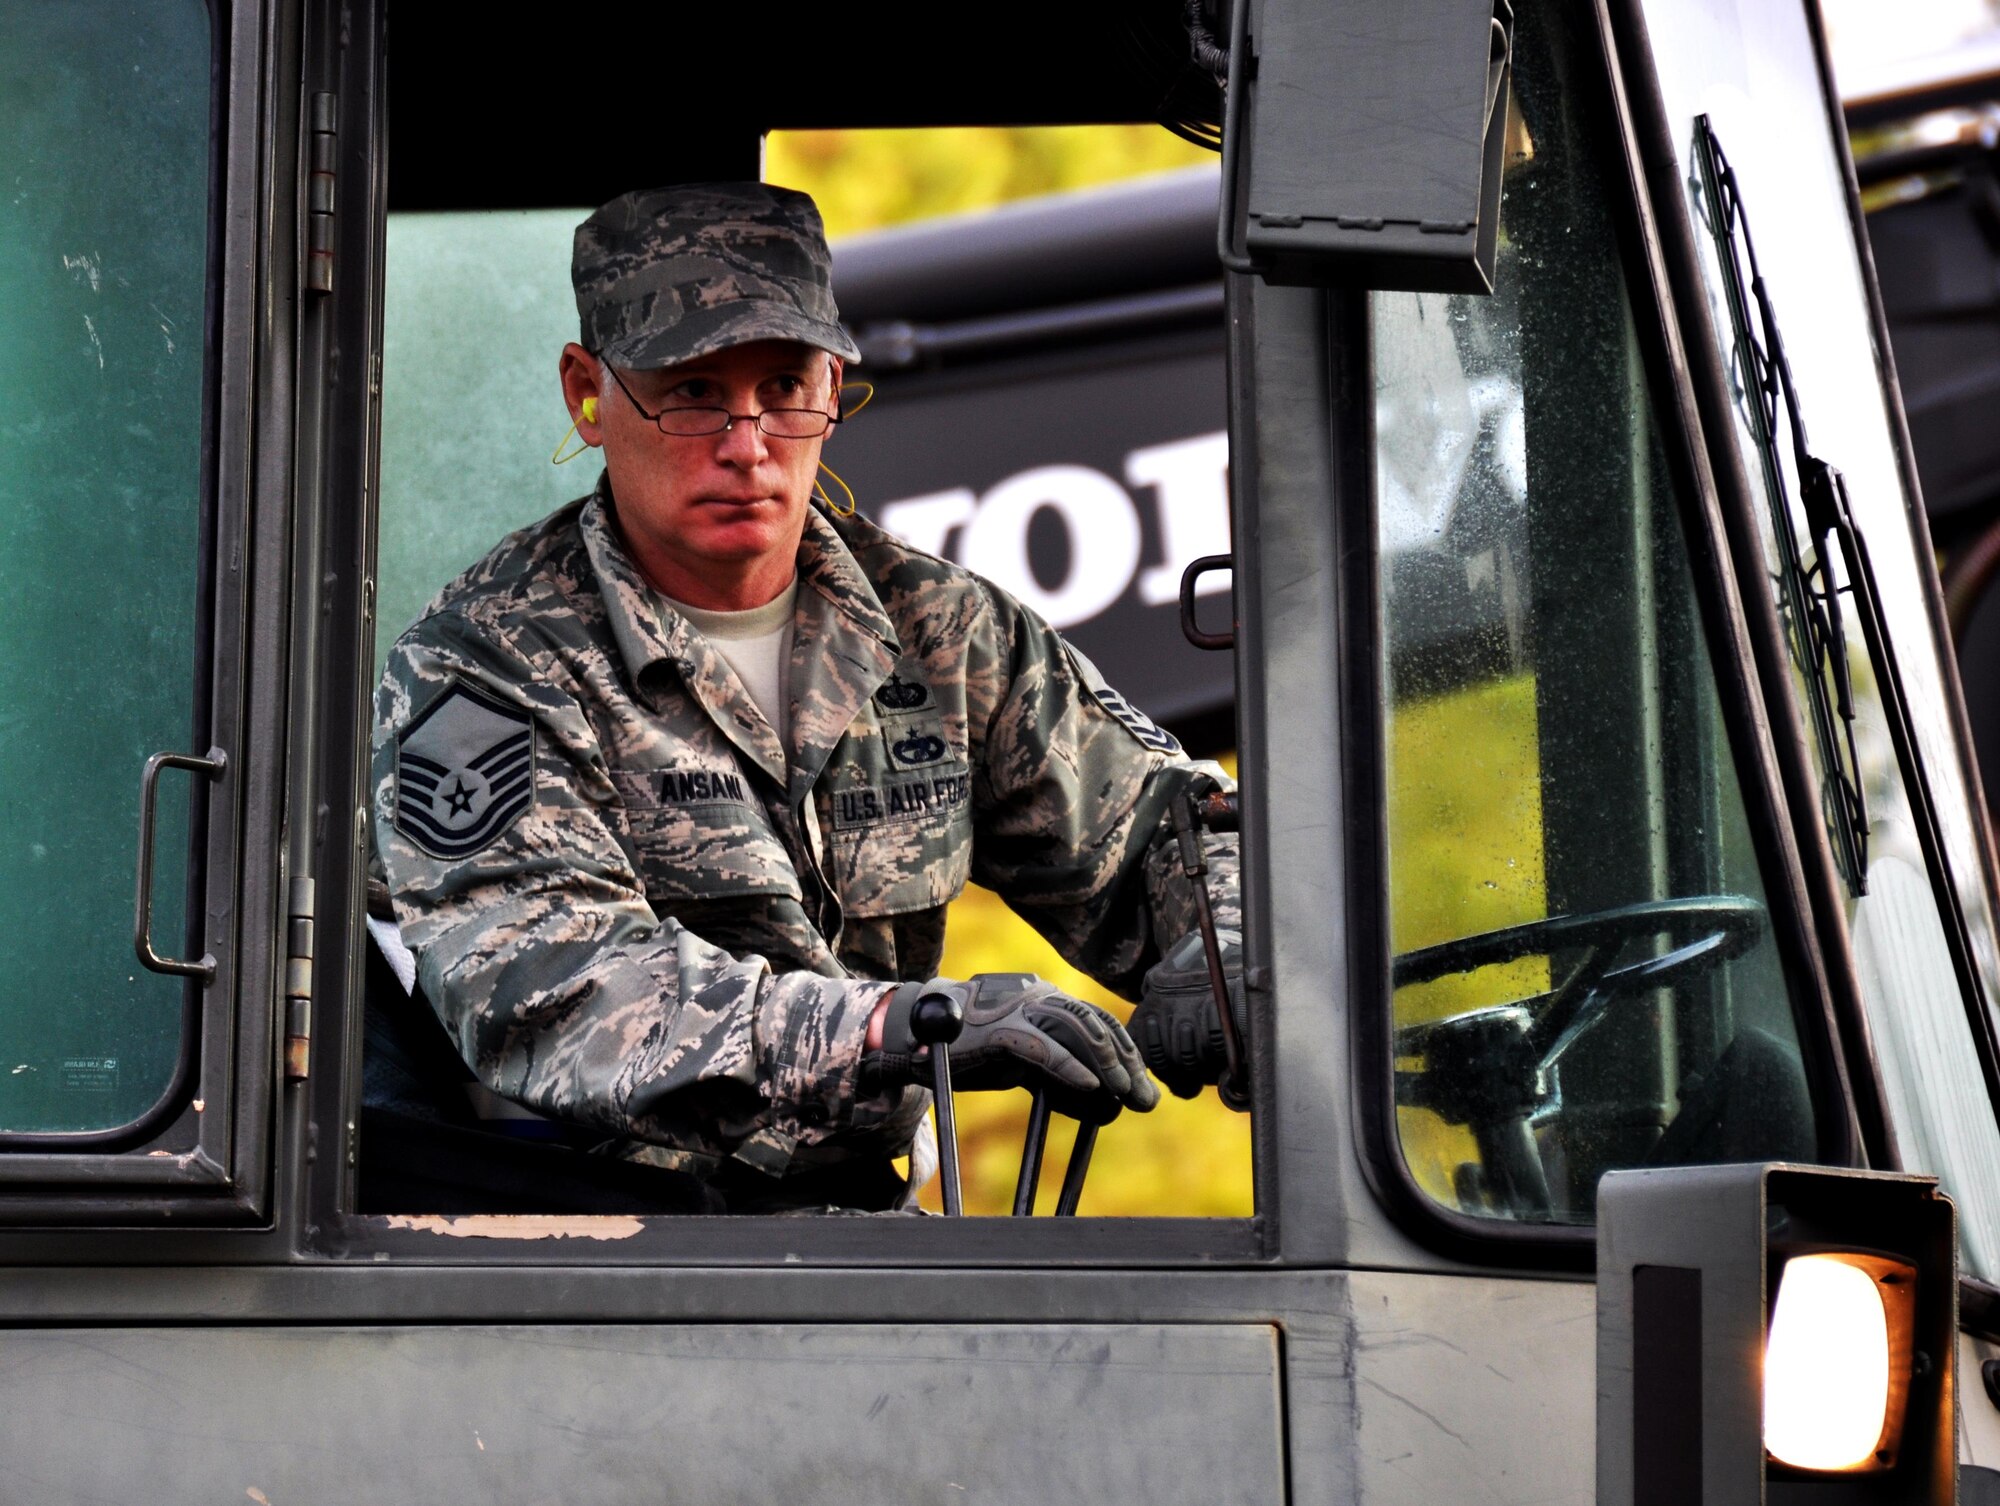 Master Sgt. Mark Ansani, 911th Force Support Squadron, Pittsburgh, Pa., drives a forklift during Force Support Silver Flag at Dobbins Air Reserve Base, Georgia, March 11, 2015. About 70 Airmen on teams from Peterson Air Force Base, Colorado; the 445th FSS from Wright-Patterson Air Force Base, Ohio; the 908th FSS from Maxwell AFB, Alabama; the 910th FSS from Youngstown ARB, Ohio; the 911th FSS from Pittsburgh, Pennsylvania; and the 934th FSS from Minneapolis – St. Paul, Minnesota competed in FS Silver Flag. (U.S. Air Force photo/Senior Airman Daniel Phelps)